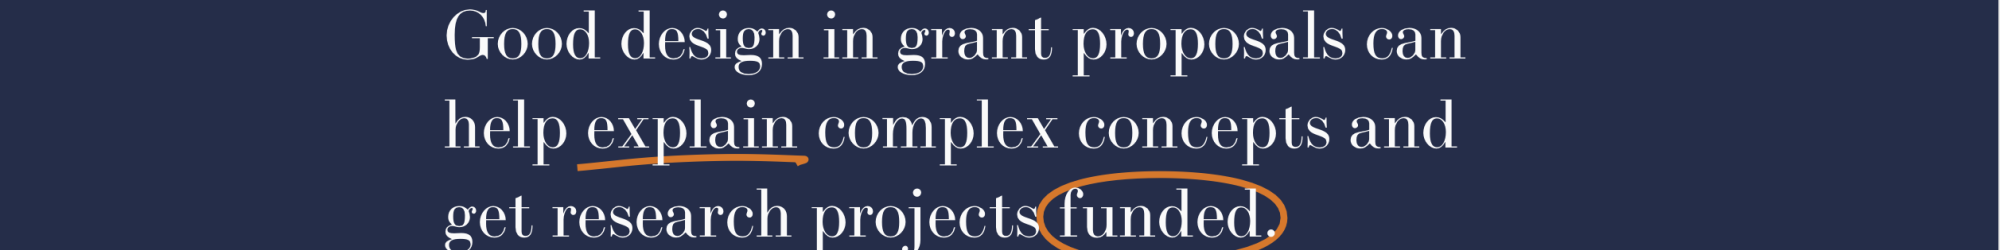 Good design can help proposals get funded